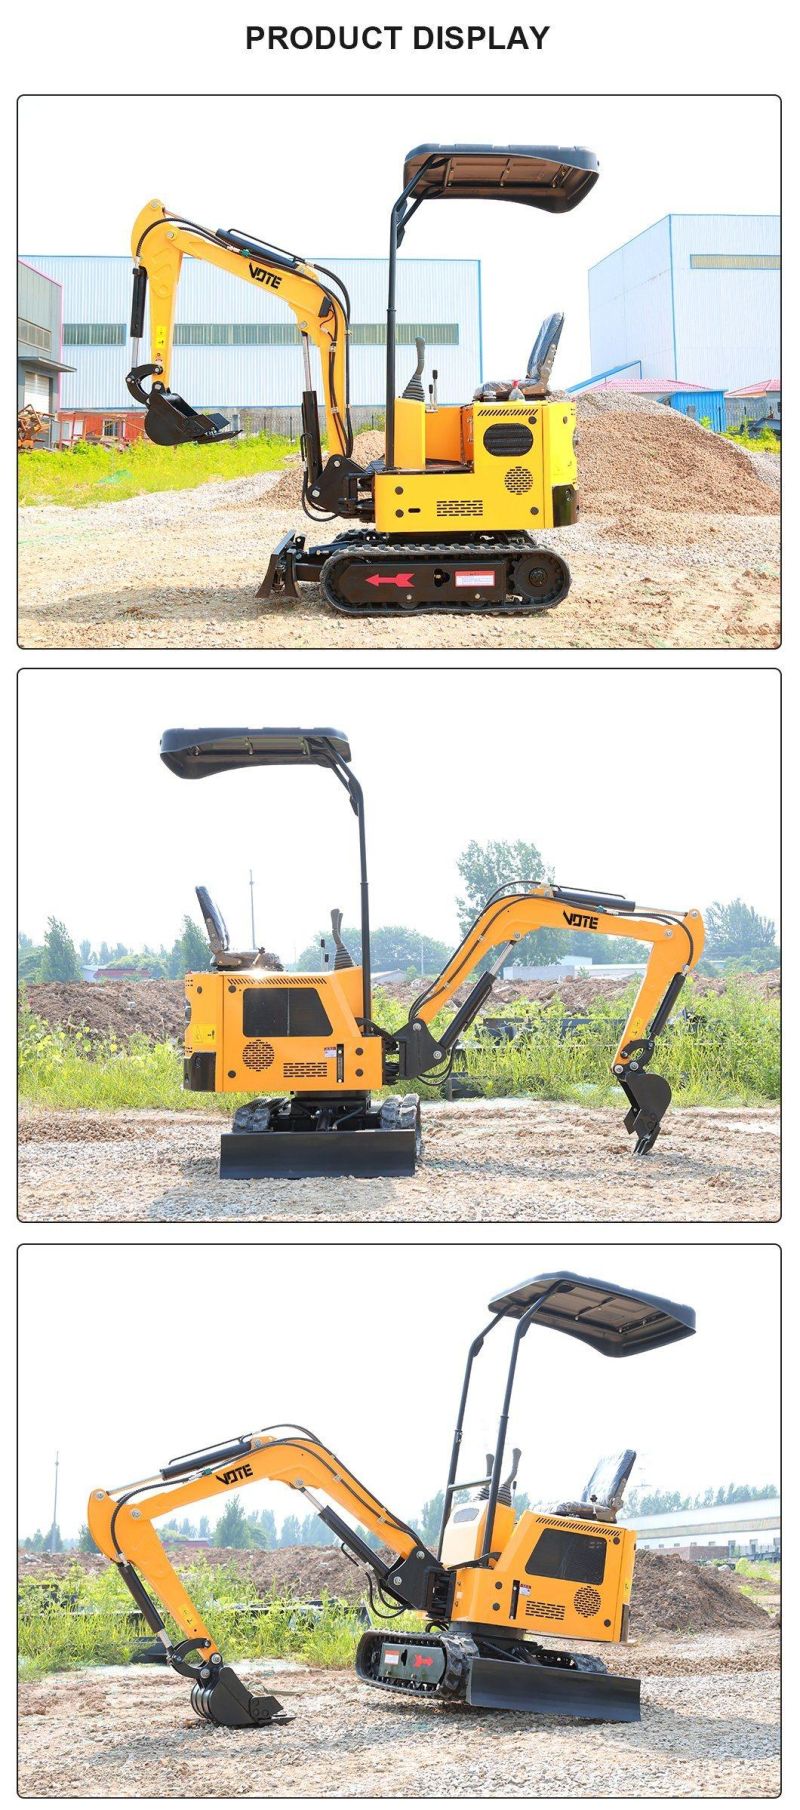 High-Quality Hot-Selling Product, High Operating Efficiency 1.5km/H Small Excavator